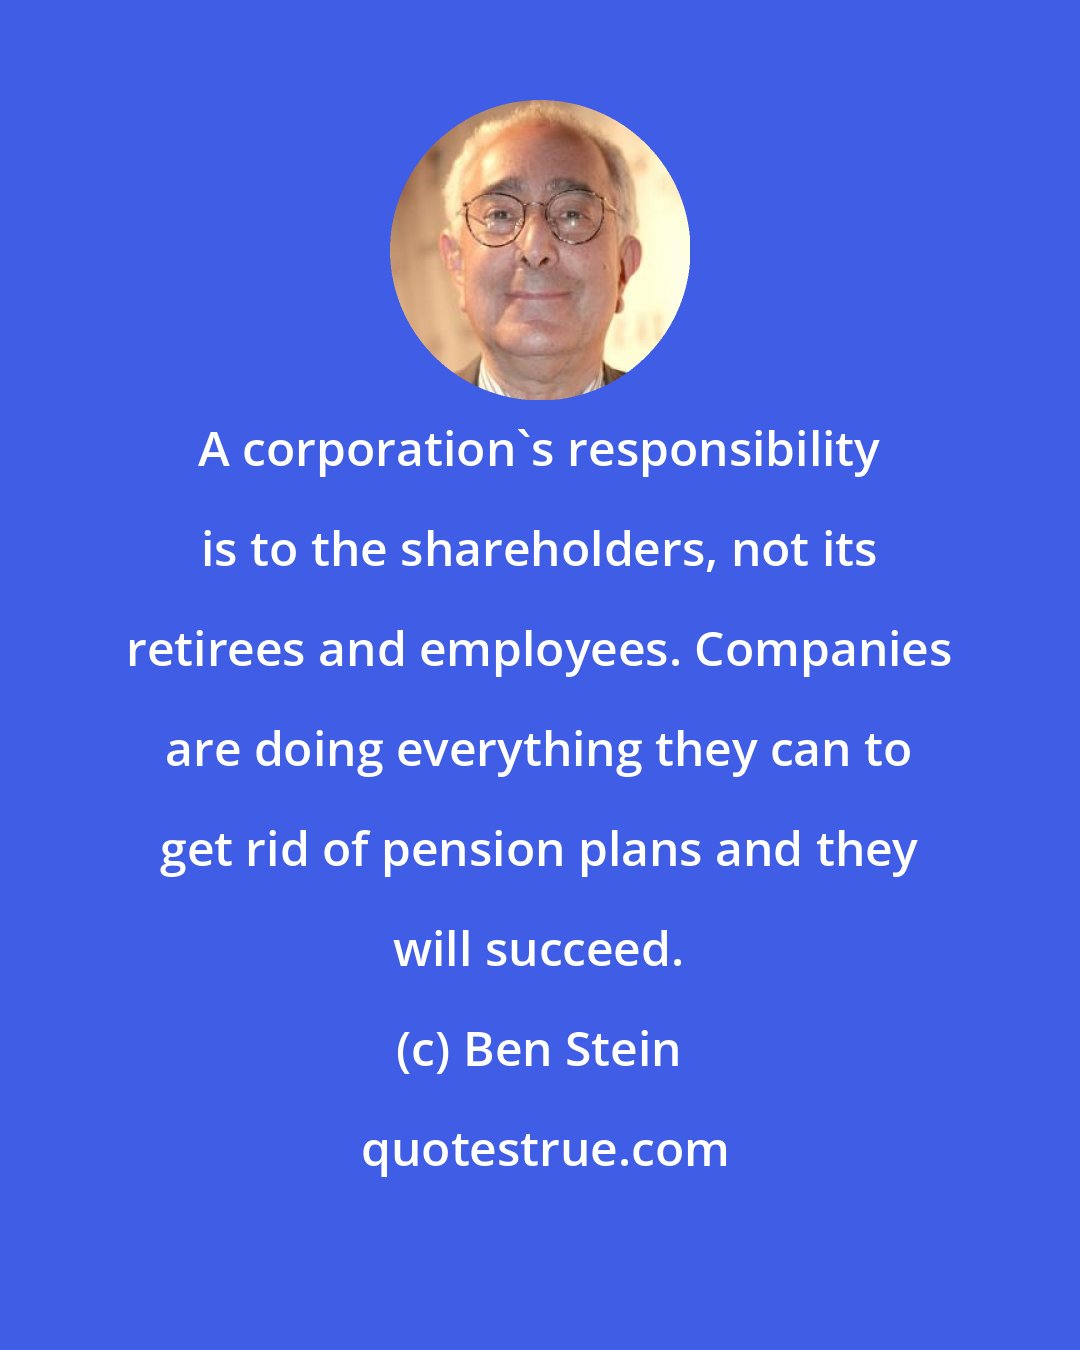 Ben Stein: A corporation's responsibility is to the shareholders, not its retirees and employees. Companies are doing everything they can to get rid of pension plans and they will succeed.